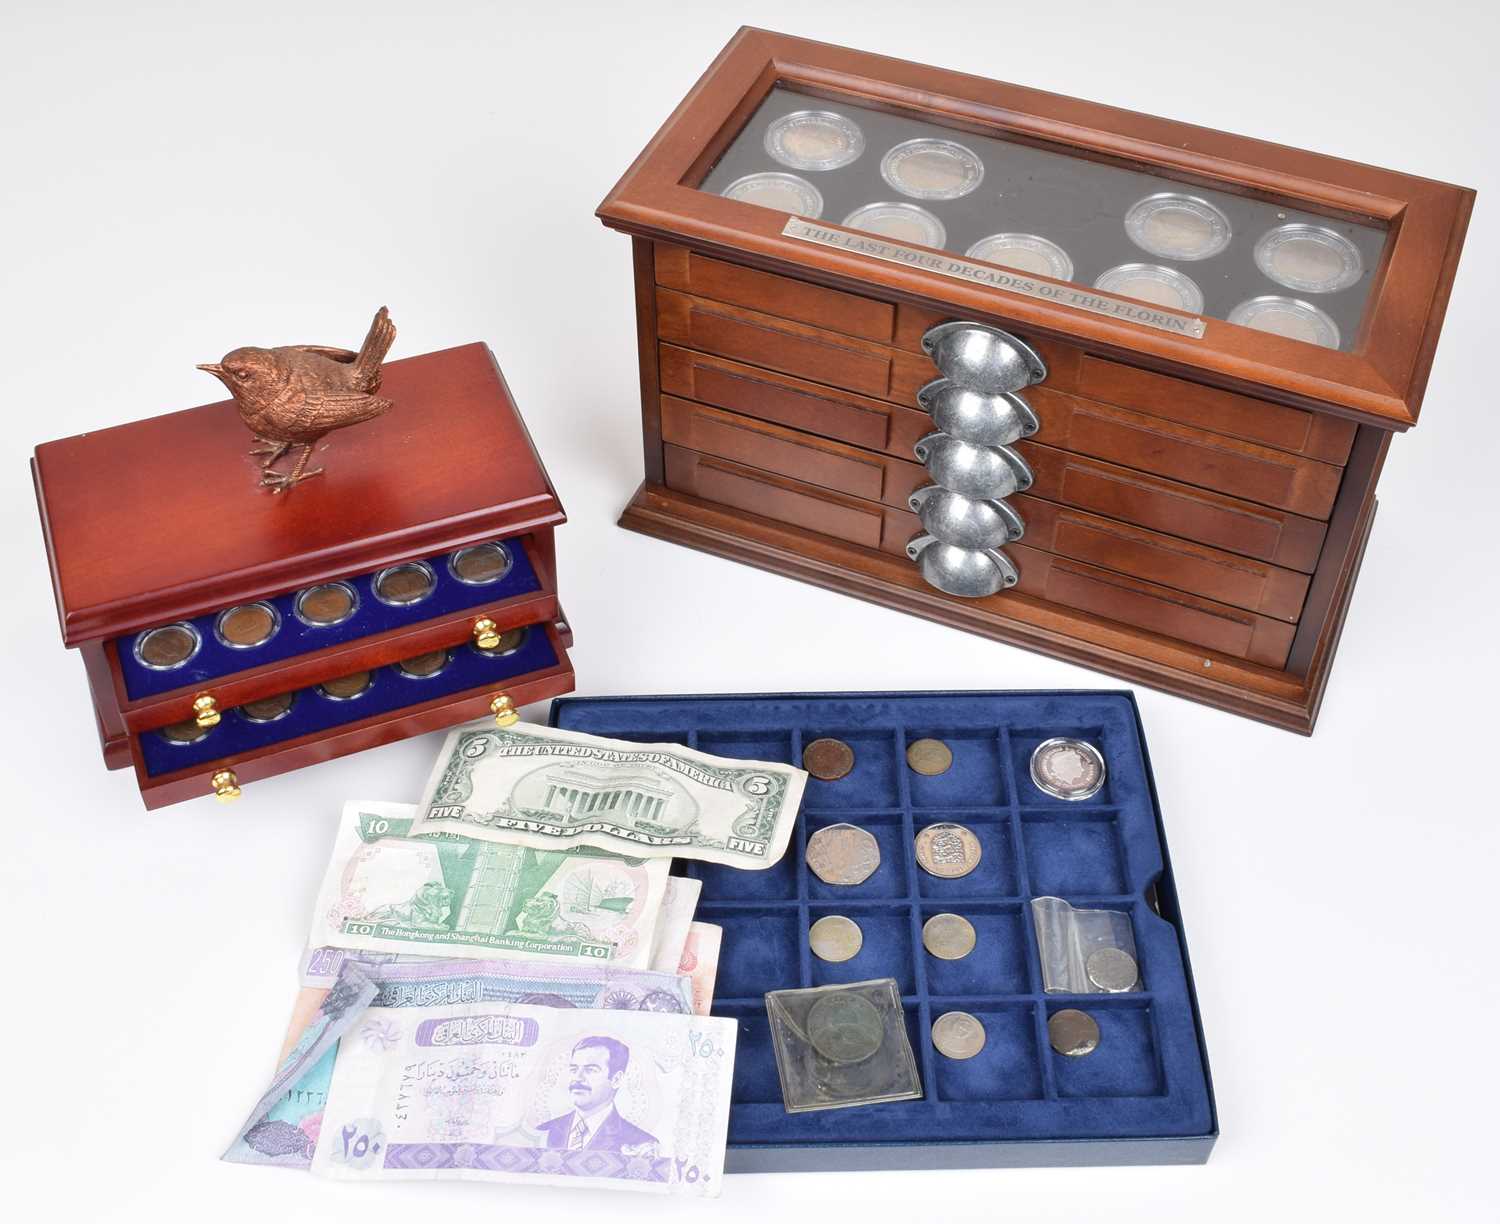 Lot 6 - Three Danbury Mint presentation sets and small assortment of coins and banknotes.